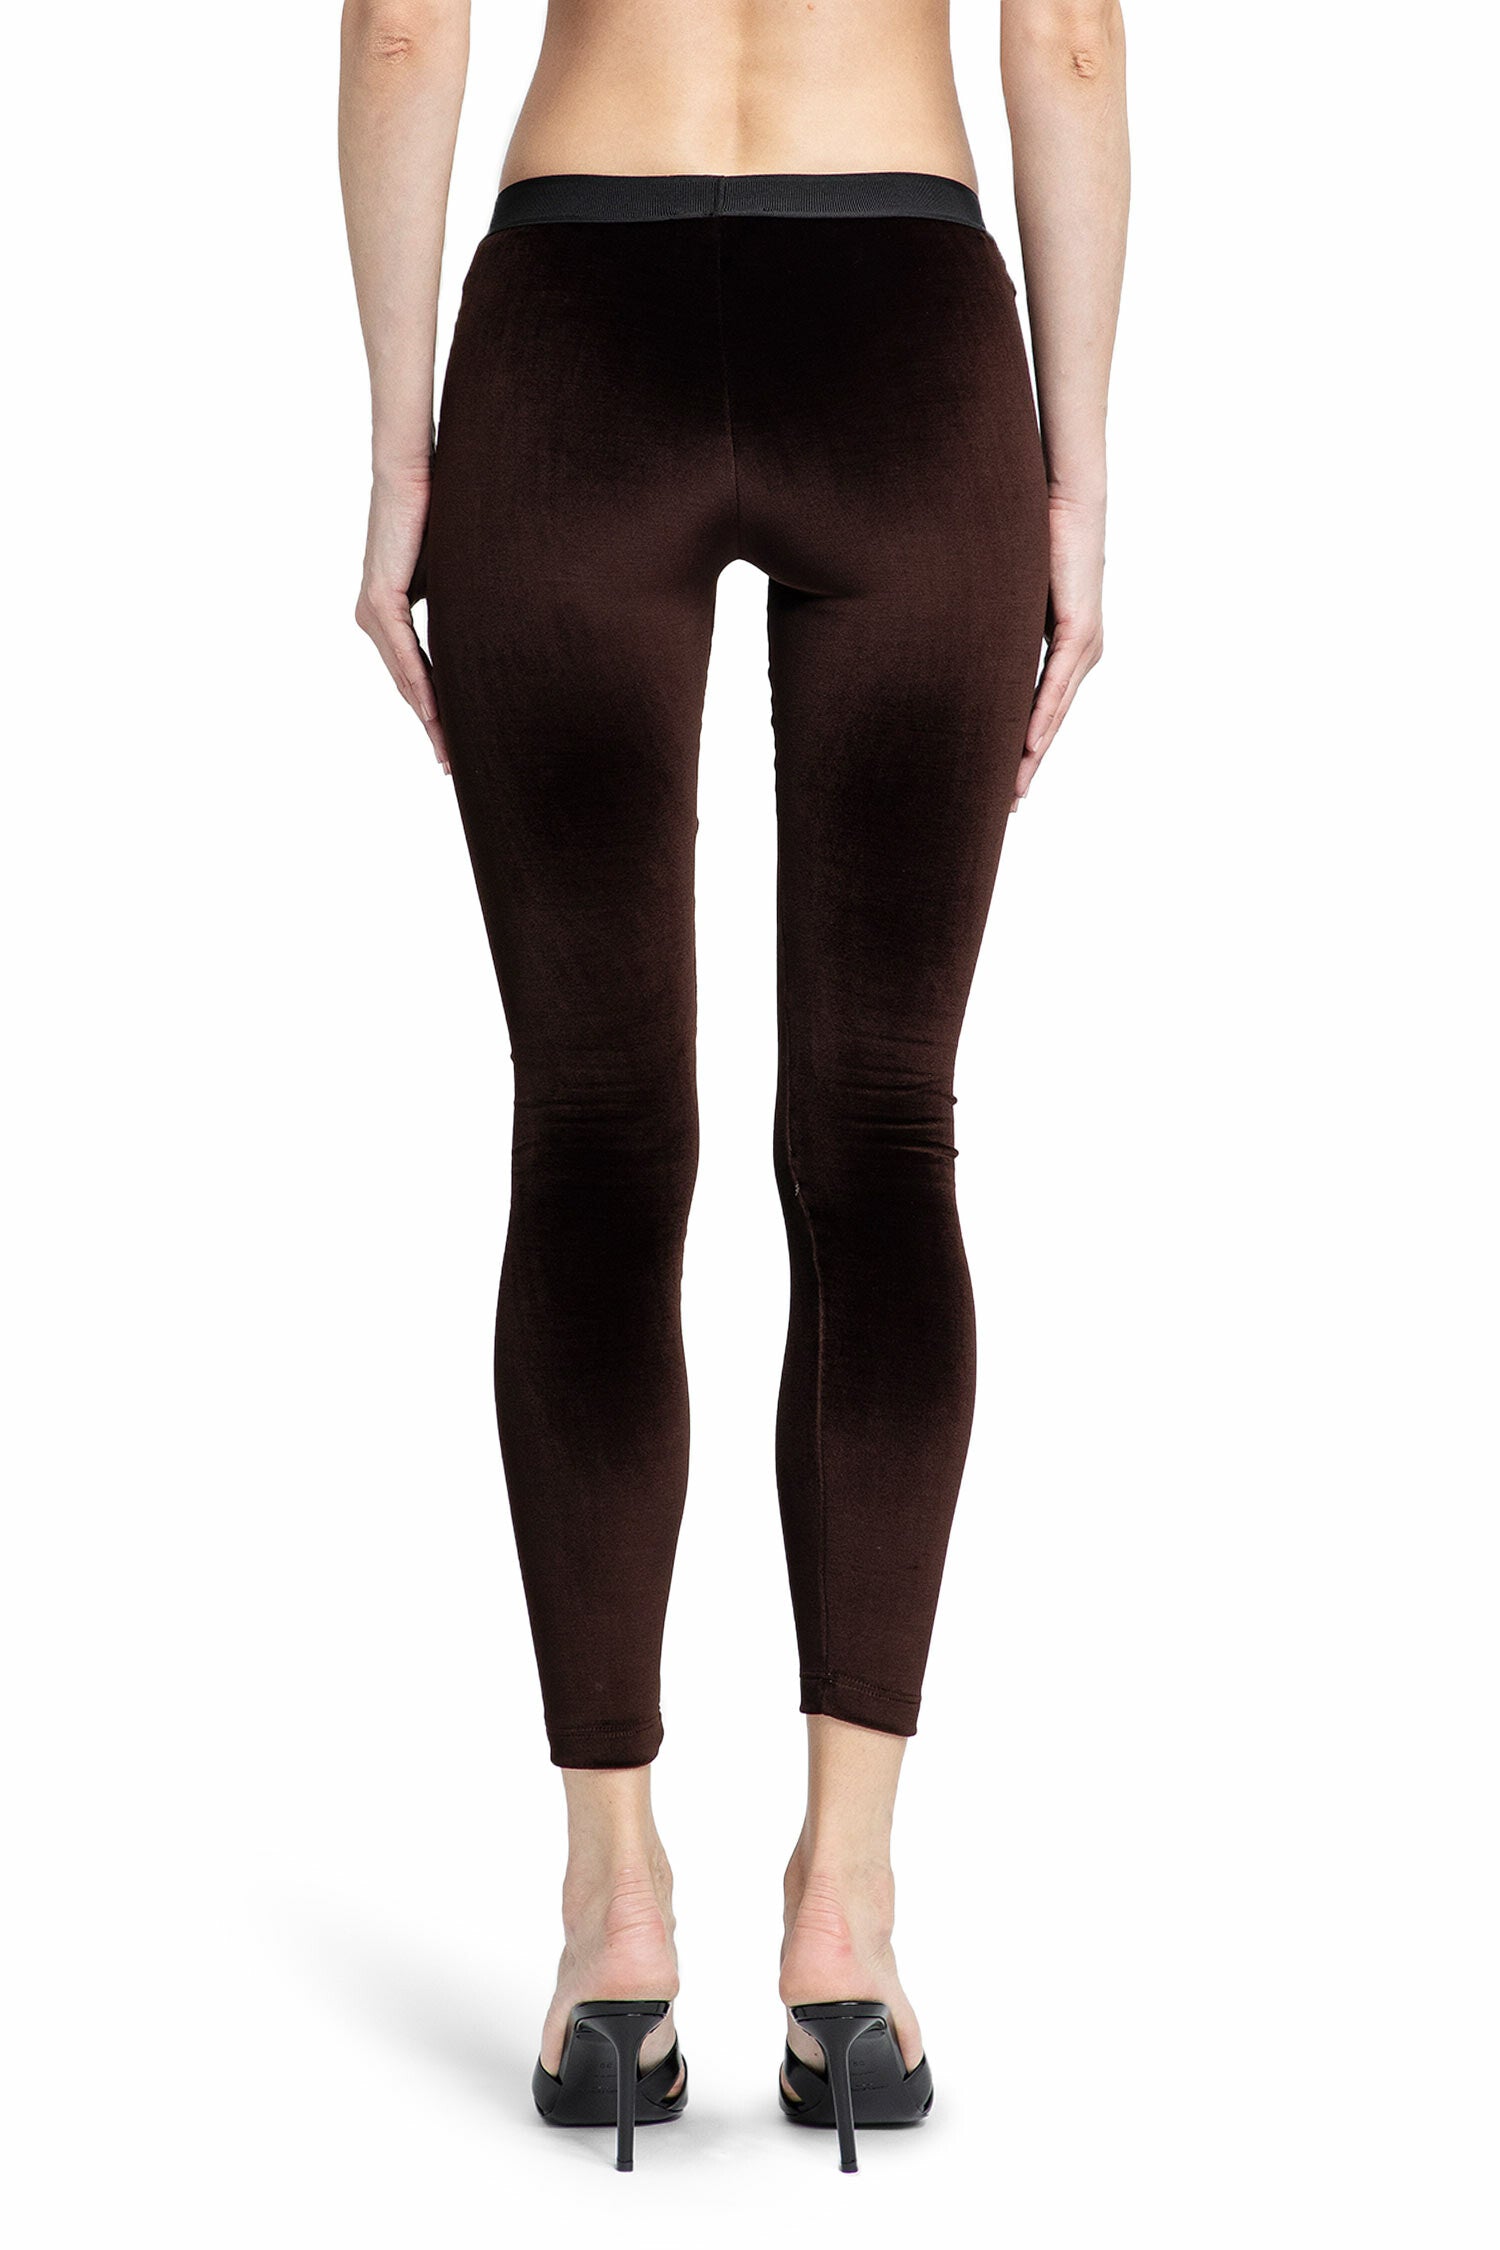 TOM FORD WOMAN BROWN TROUSERS